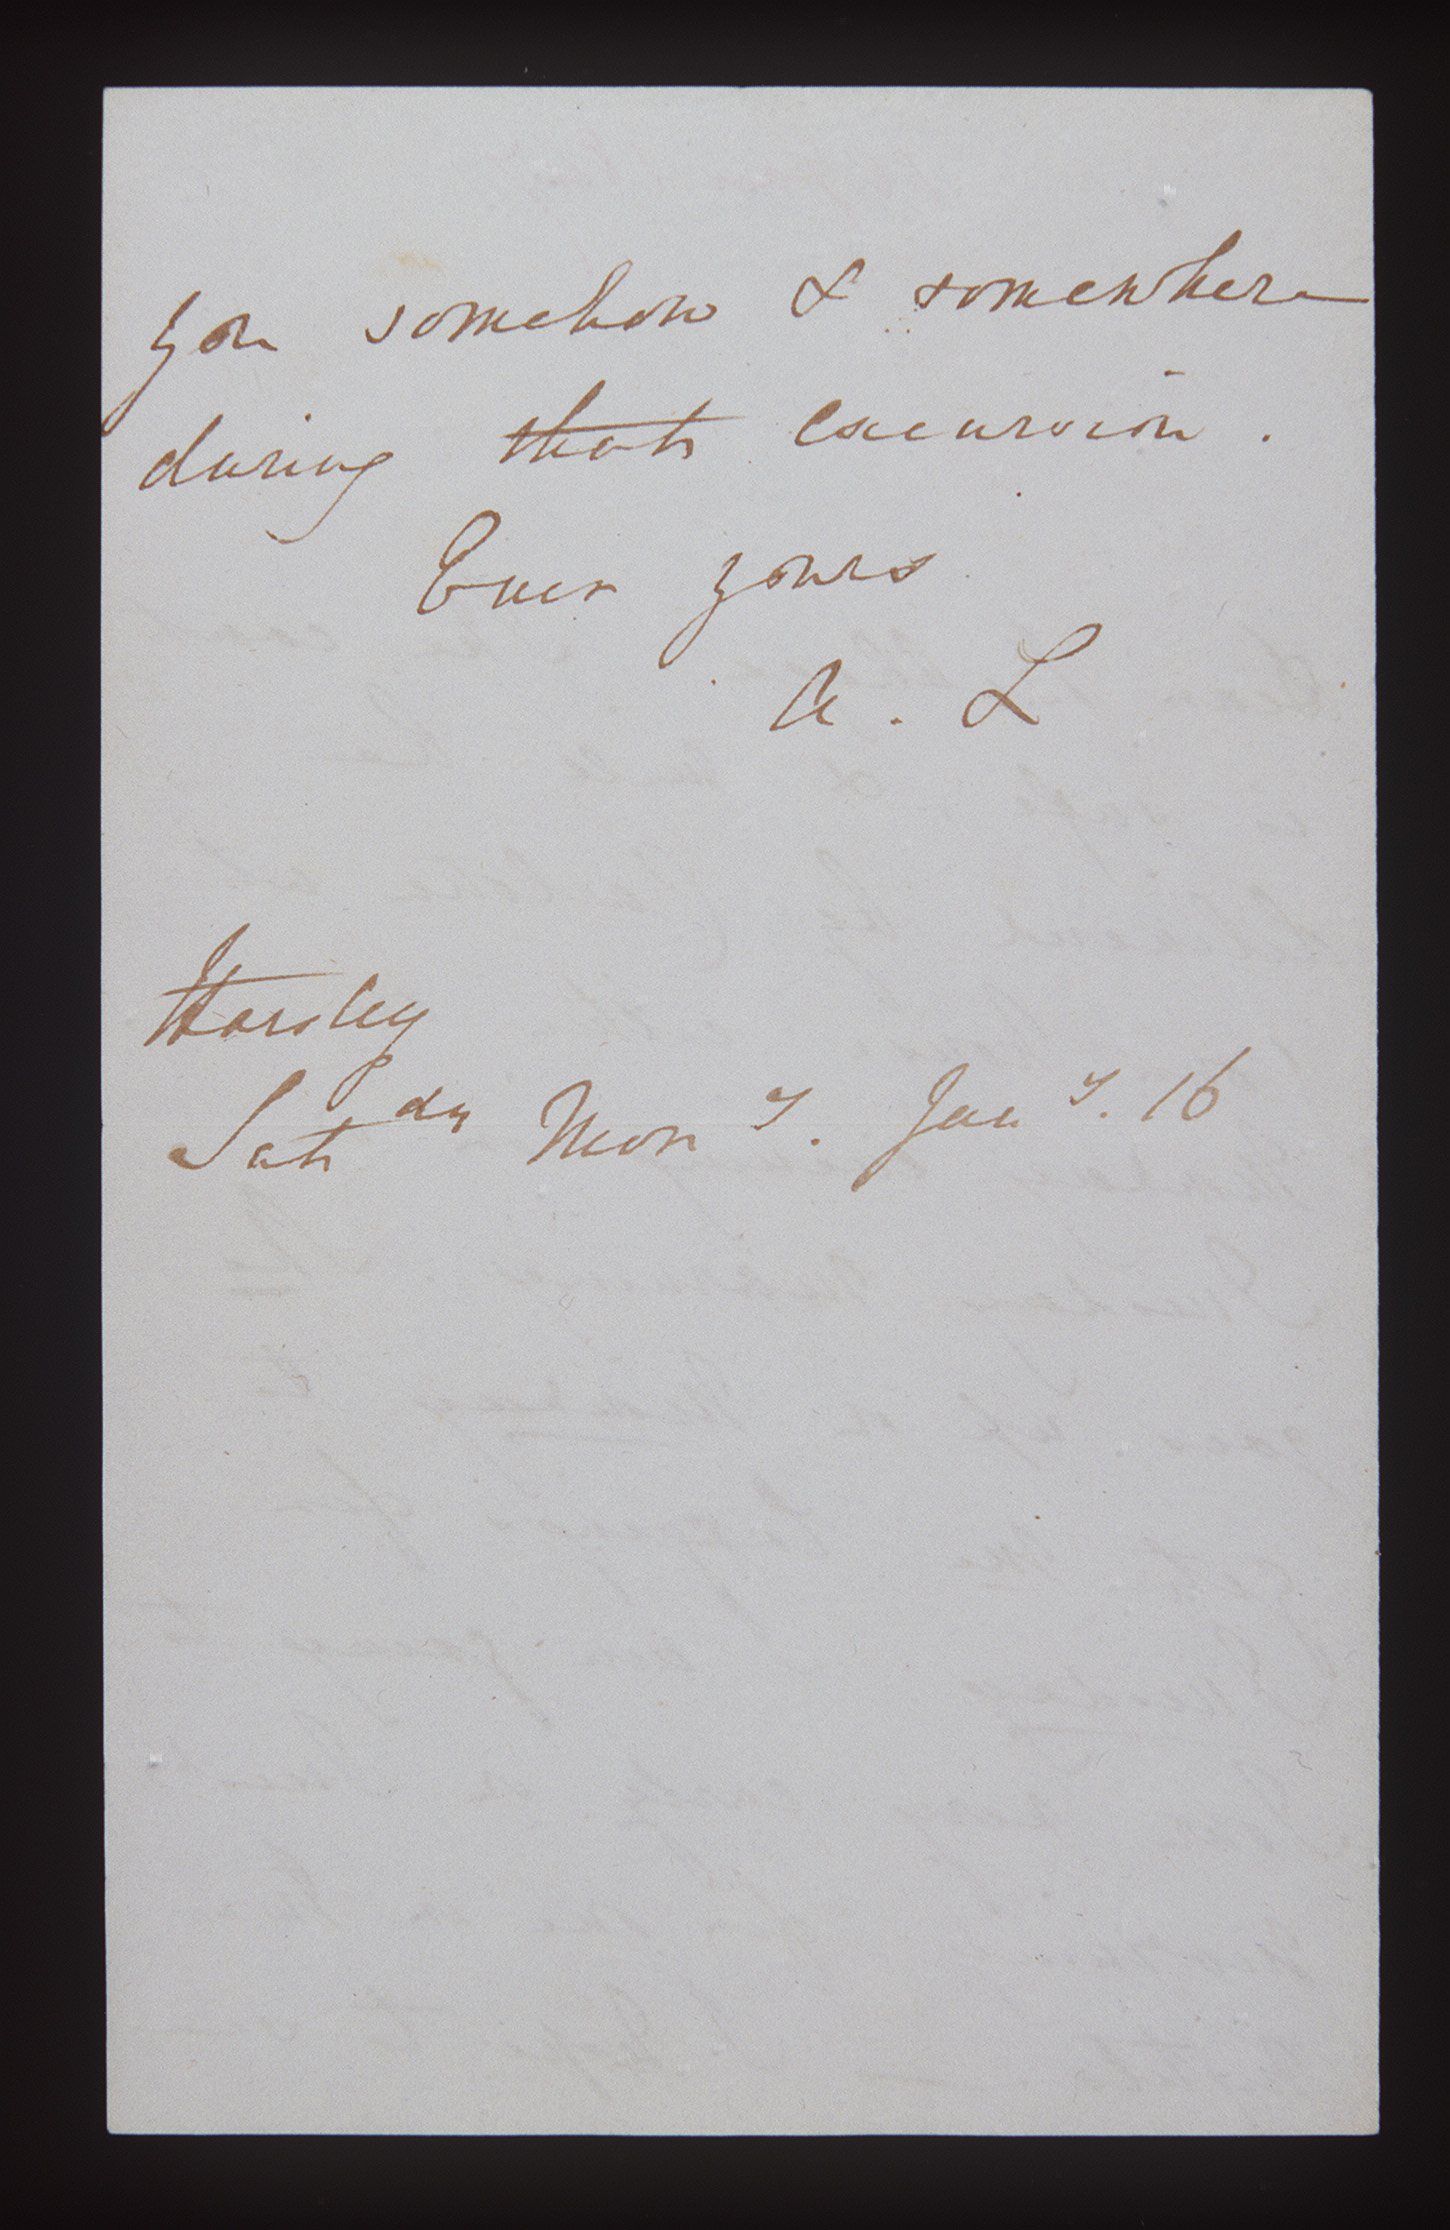 Letters from Ada Lovelace to Charles Babbage